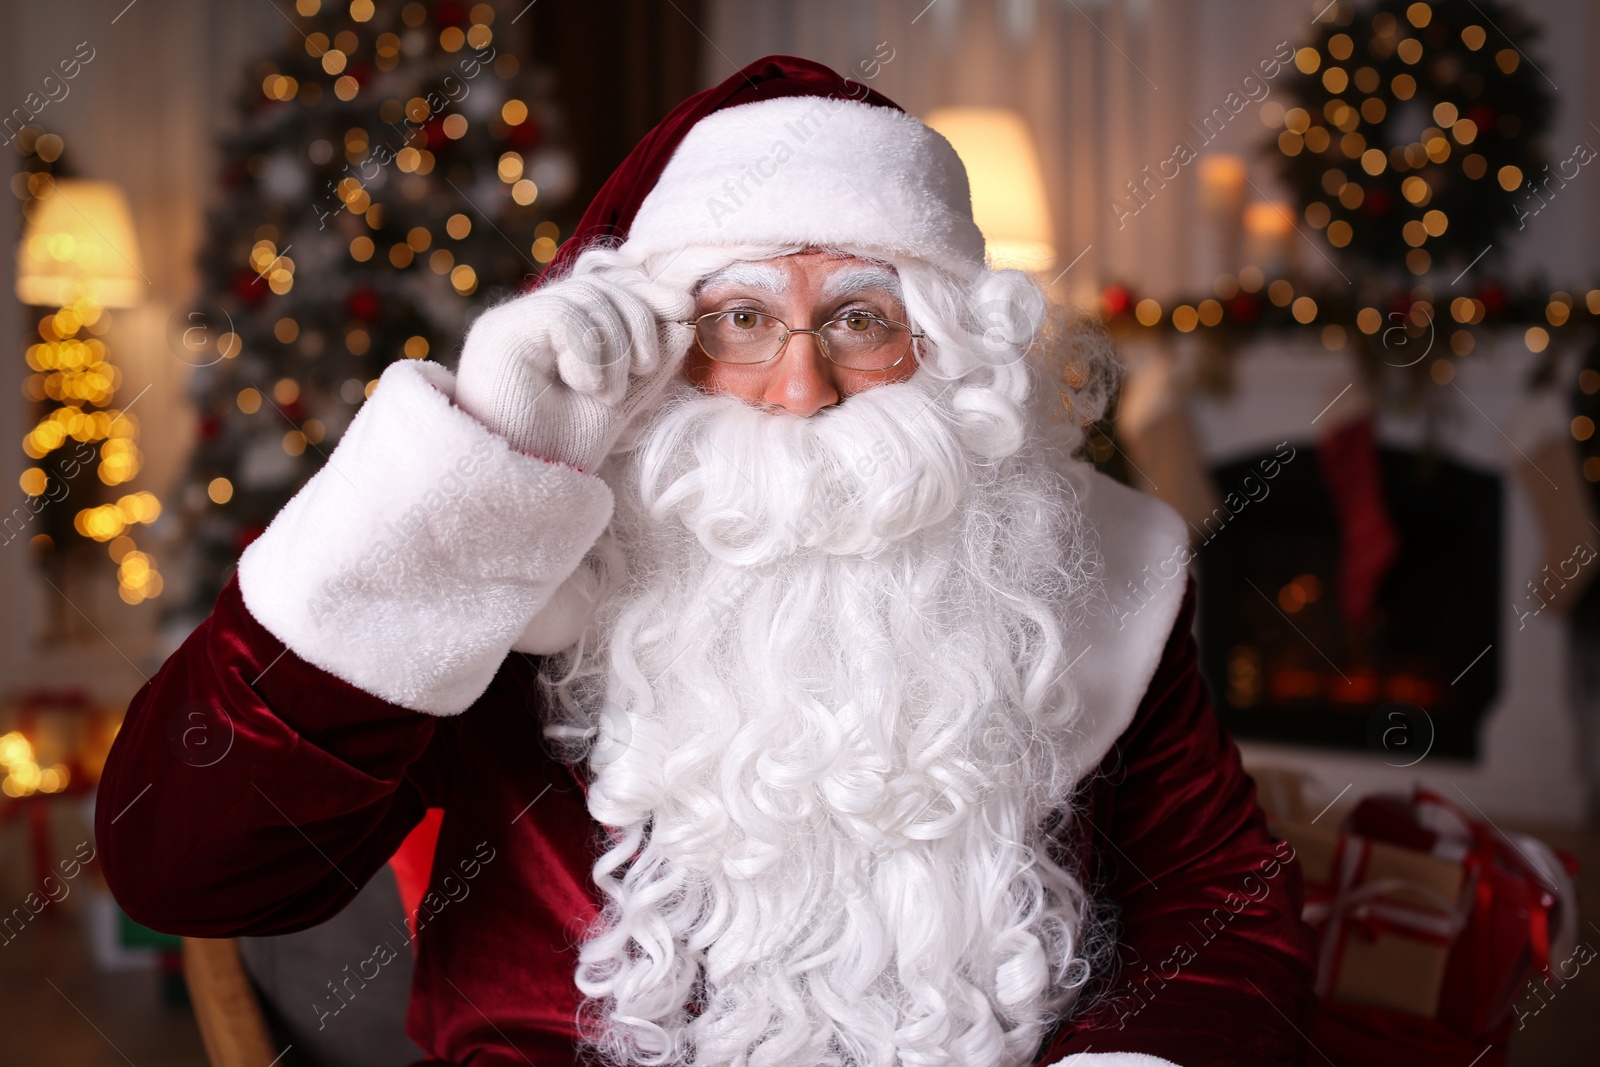 Photo of Santa Claus in room decorated for Christmas